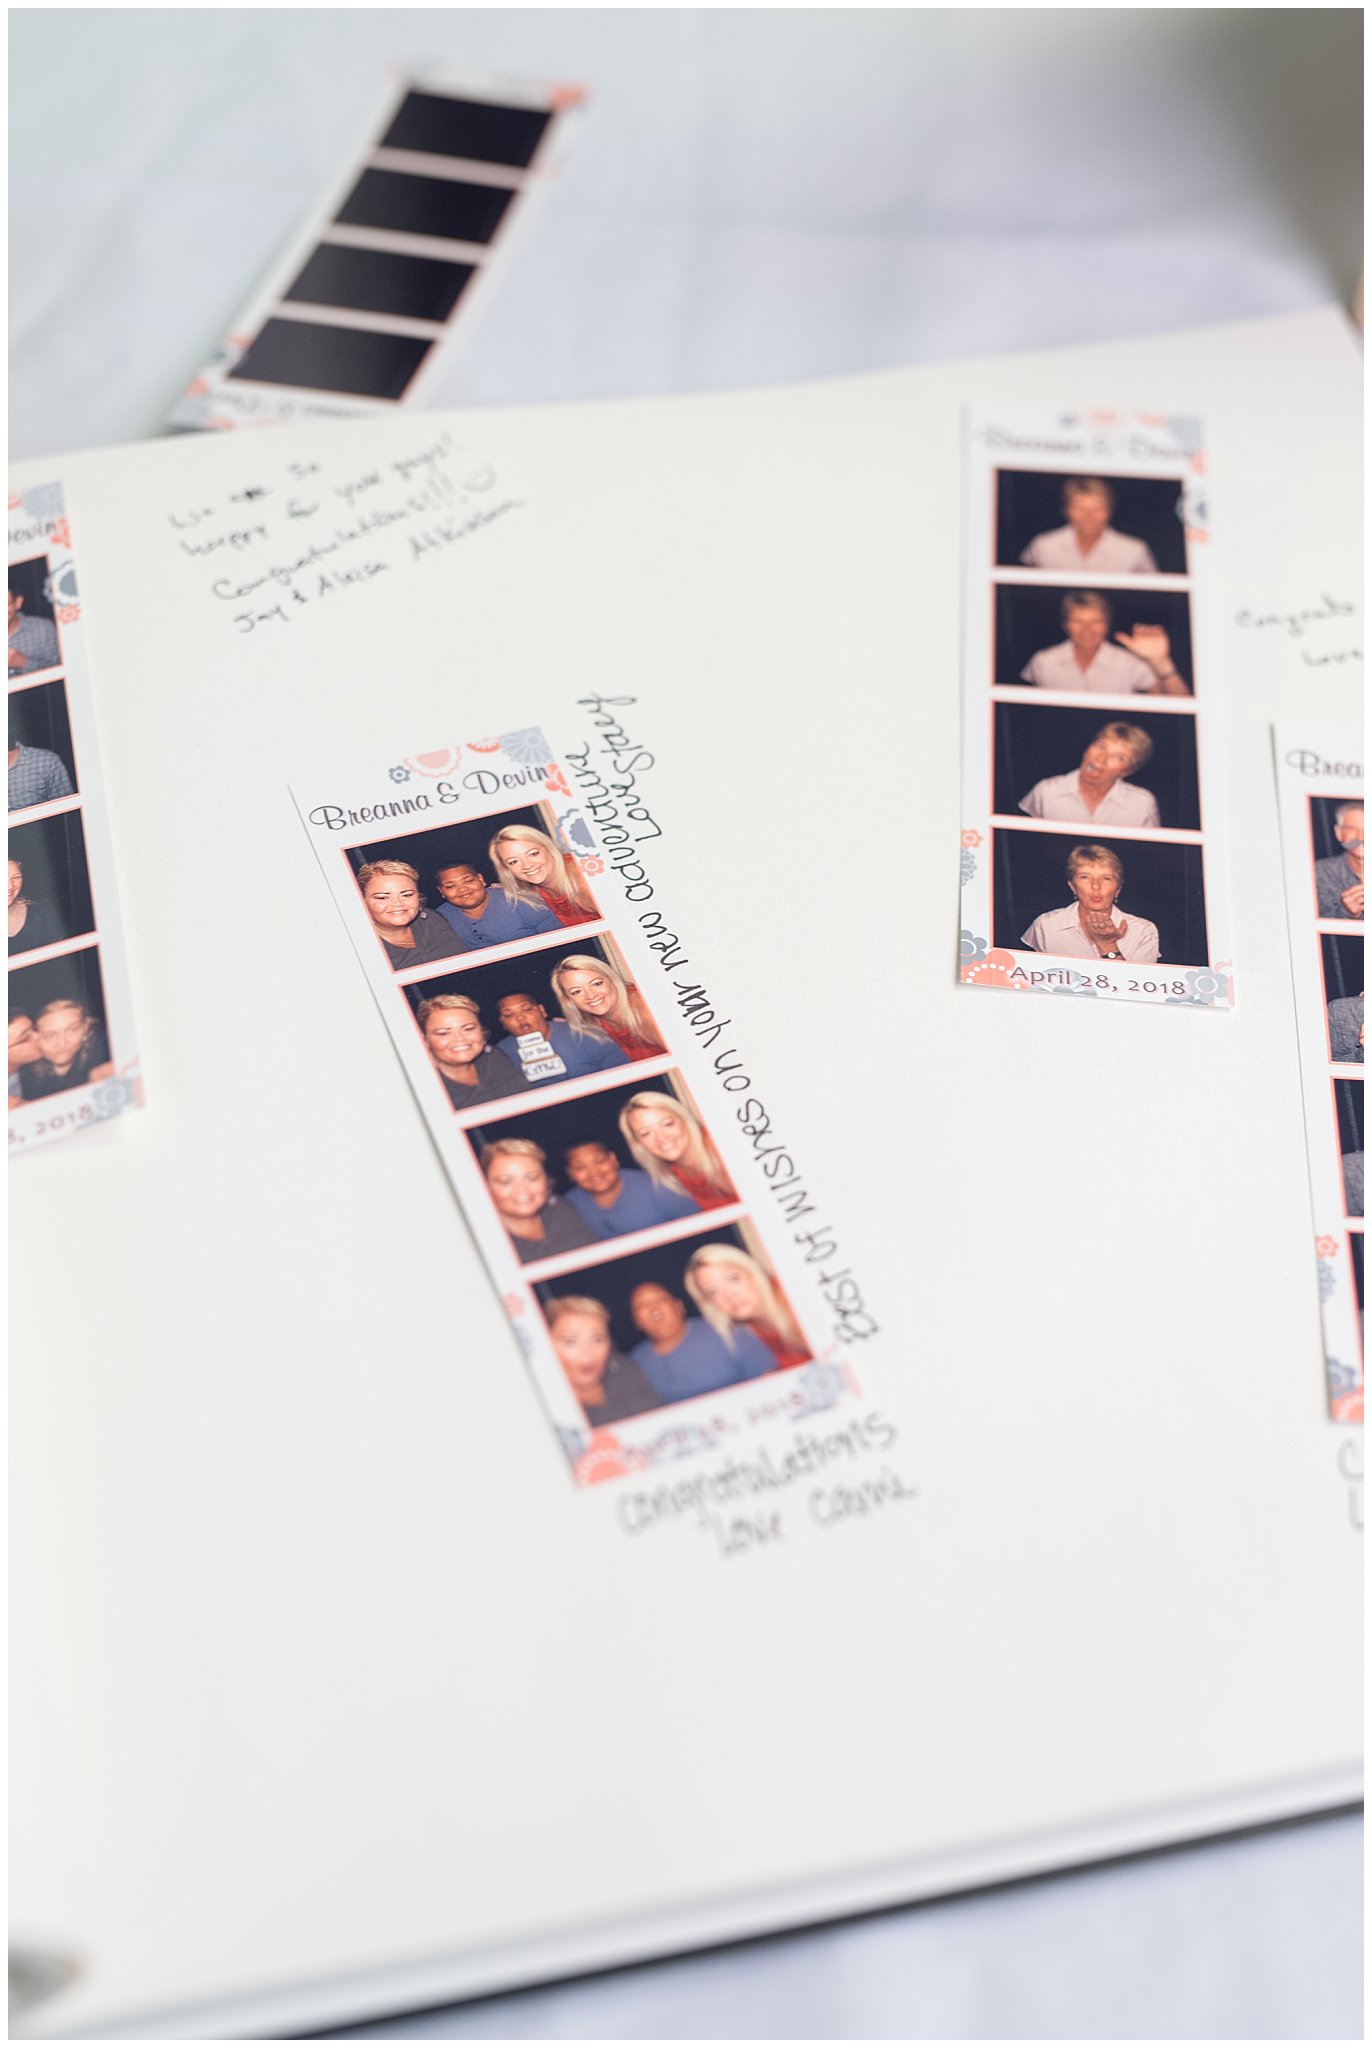 Photobooth guest book at wedding reception | Why You Should Skip a Receiving Line during your LDS temple wedding | Jessie and Dallin Photography